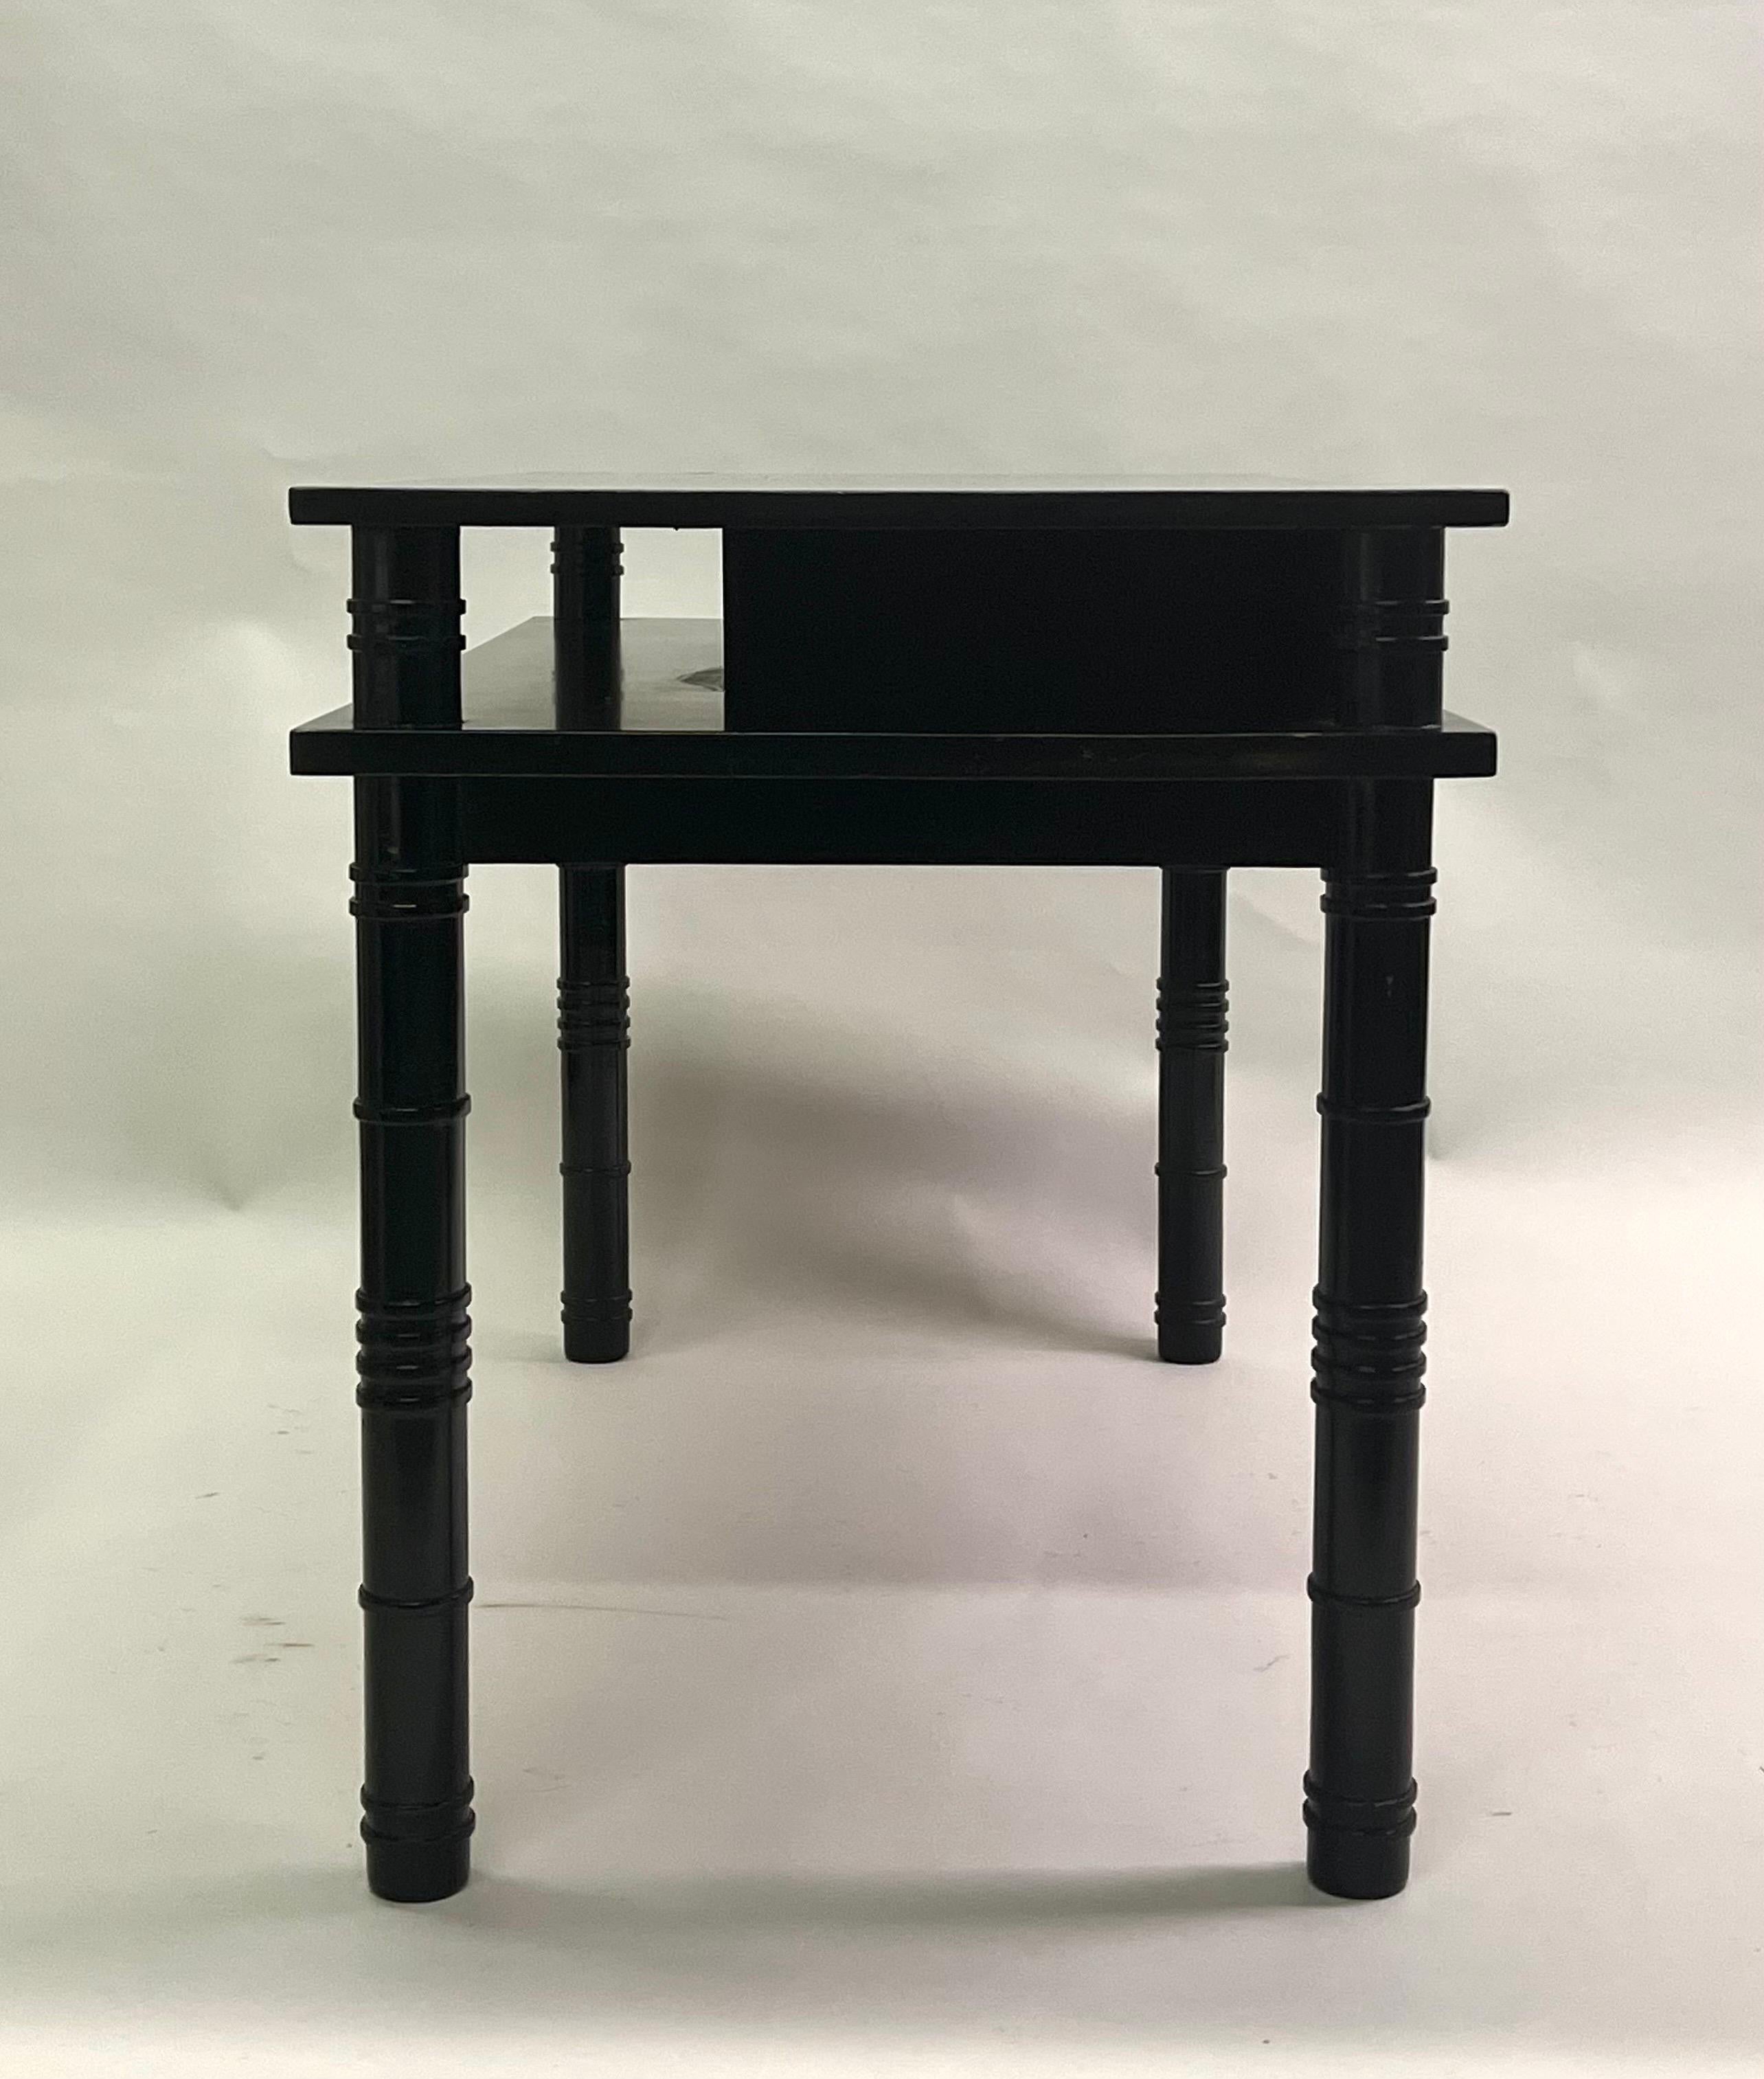 French MidCentury Modern Neoclassical Ebonized Sycamore Desk by Leon Jallot 1936 For Sale 1